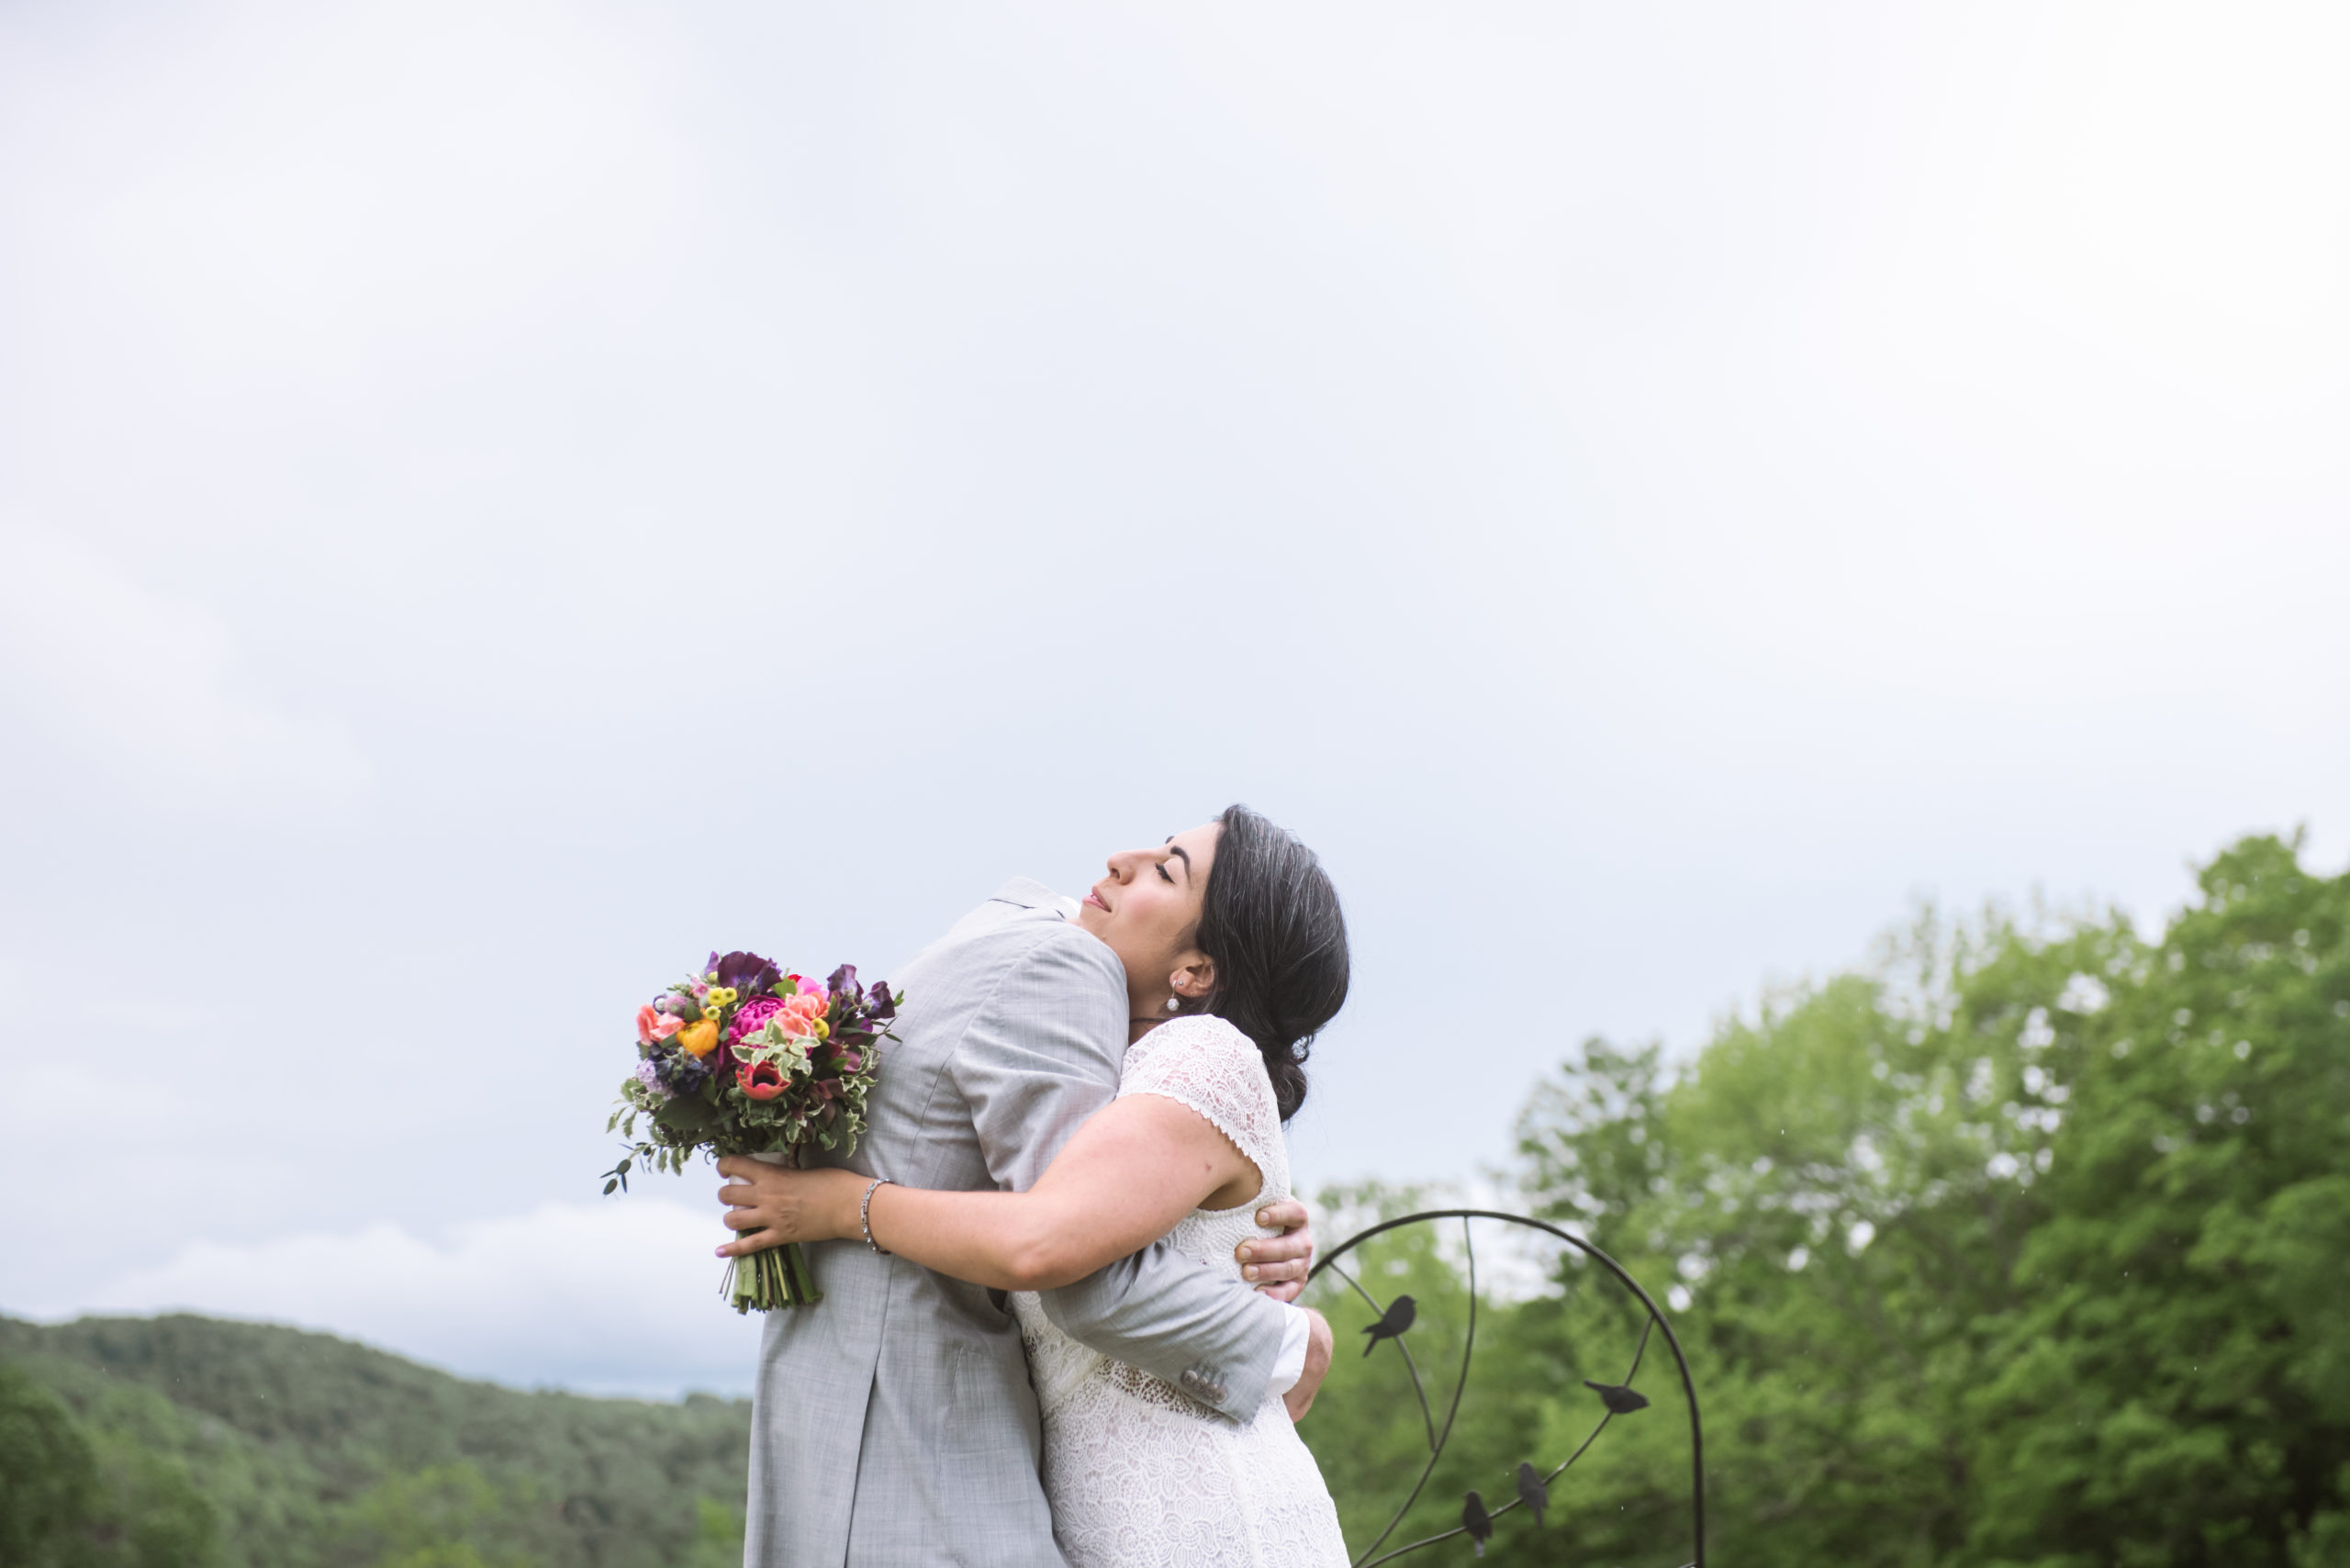 Bride and groom standing, embracing, facing one another. They are kissing one another and have their arms wrapped around each other. The bride is holding her bouquet in her left hand. They are standing in front of a dark wooden fence with lots of white wildflowers in the field. There are trees and mountains in the background.